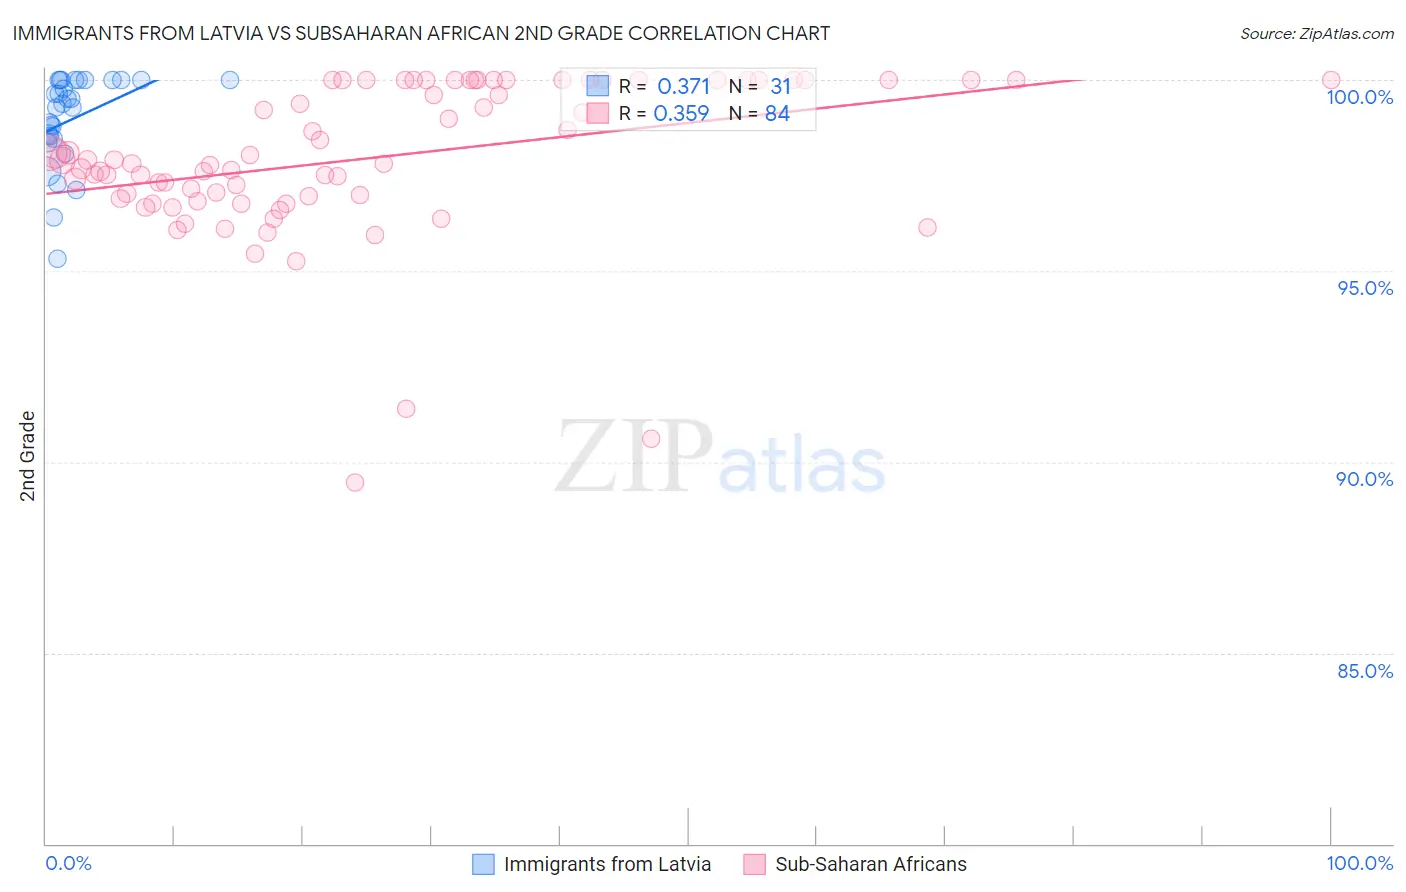 Immigrants from Latvia vs Subsaharan African 2nd Grade